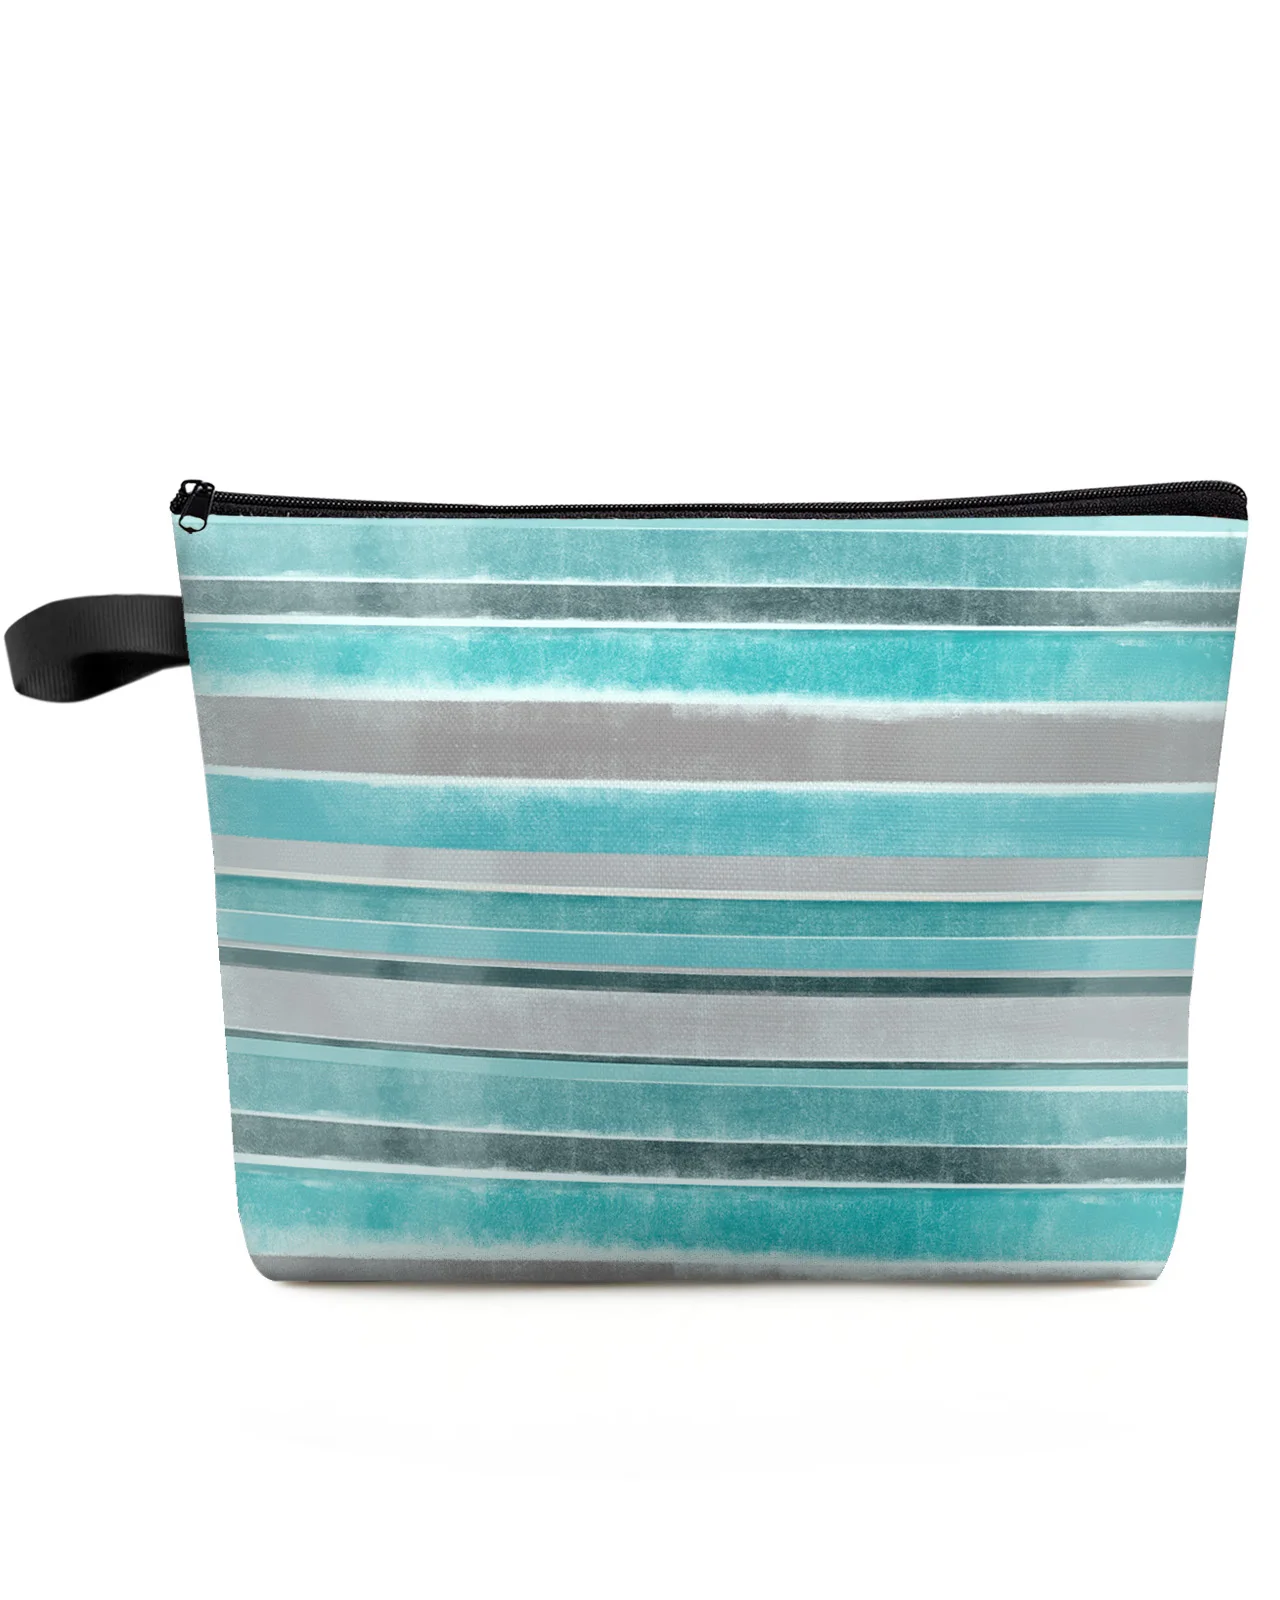 

Nordic Striped Textured Turquoise Makeup Bag Pouch Travel Essentials Women Cosmetic Bags Toilet Organizer Storage Pencil Case